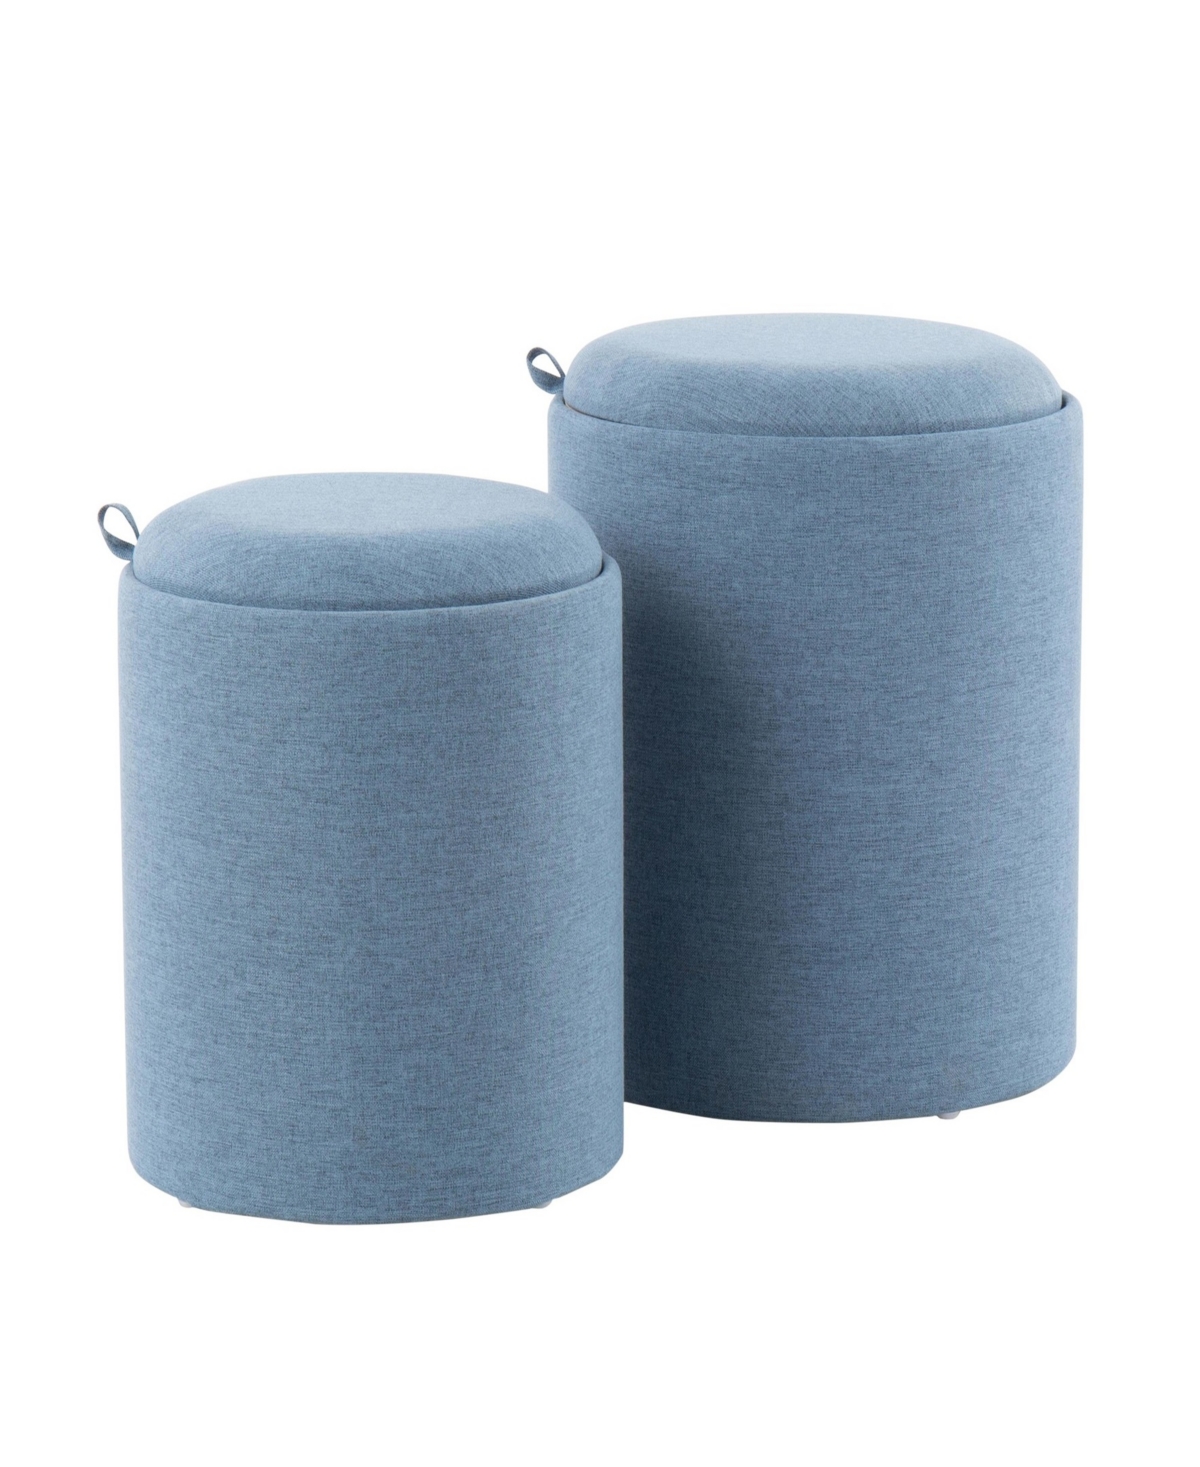 Lumisource Tray Contemporary Nesting Ottoman Set In Fabric And Wood By  In Blue Fabric,natural Wood